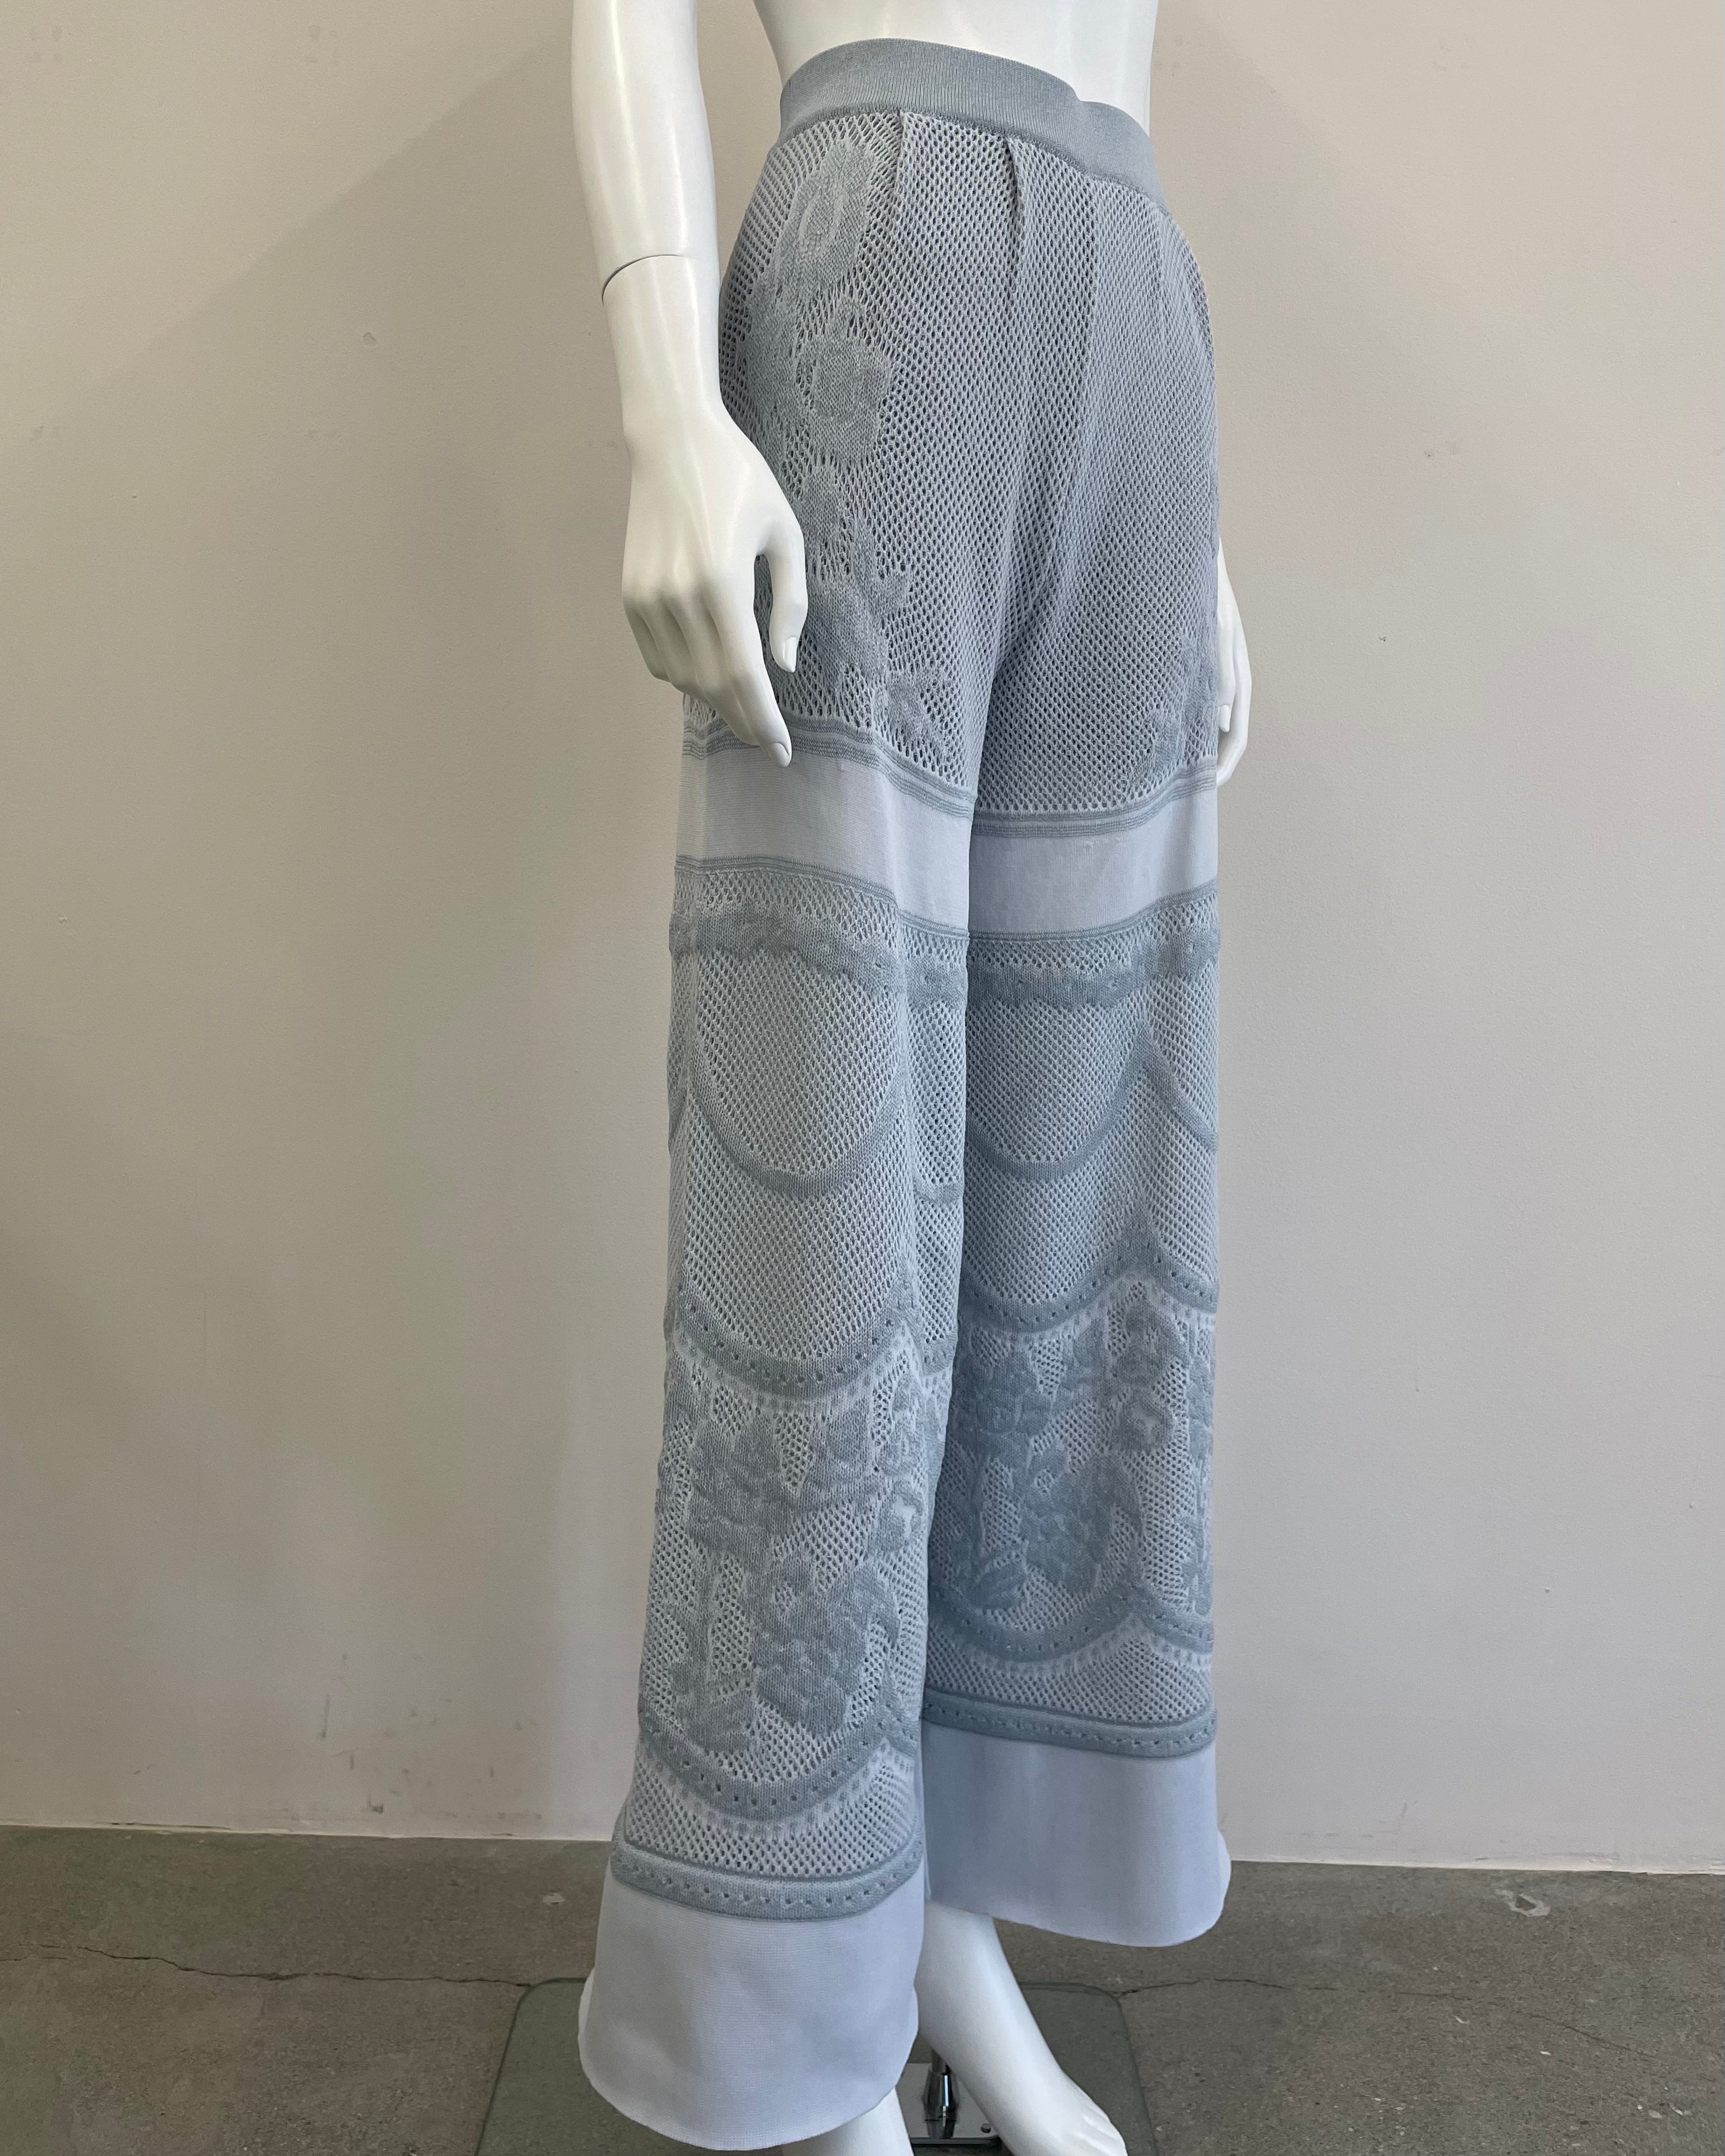 FLORAL PATTERNED LACY PANTS[BLUE GRAY]